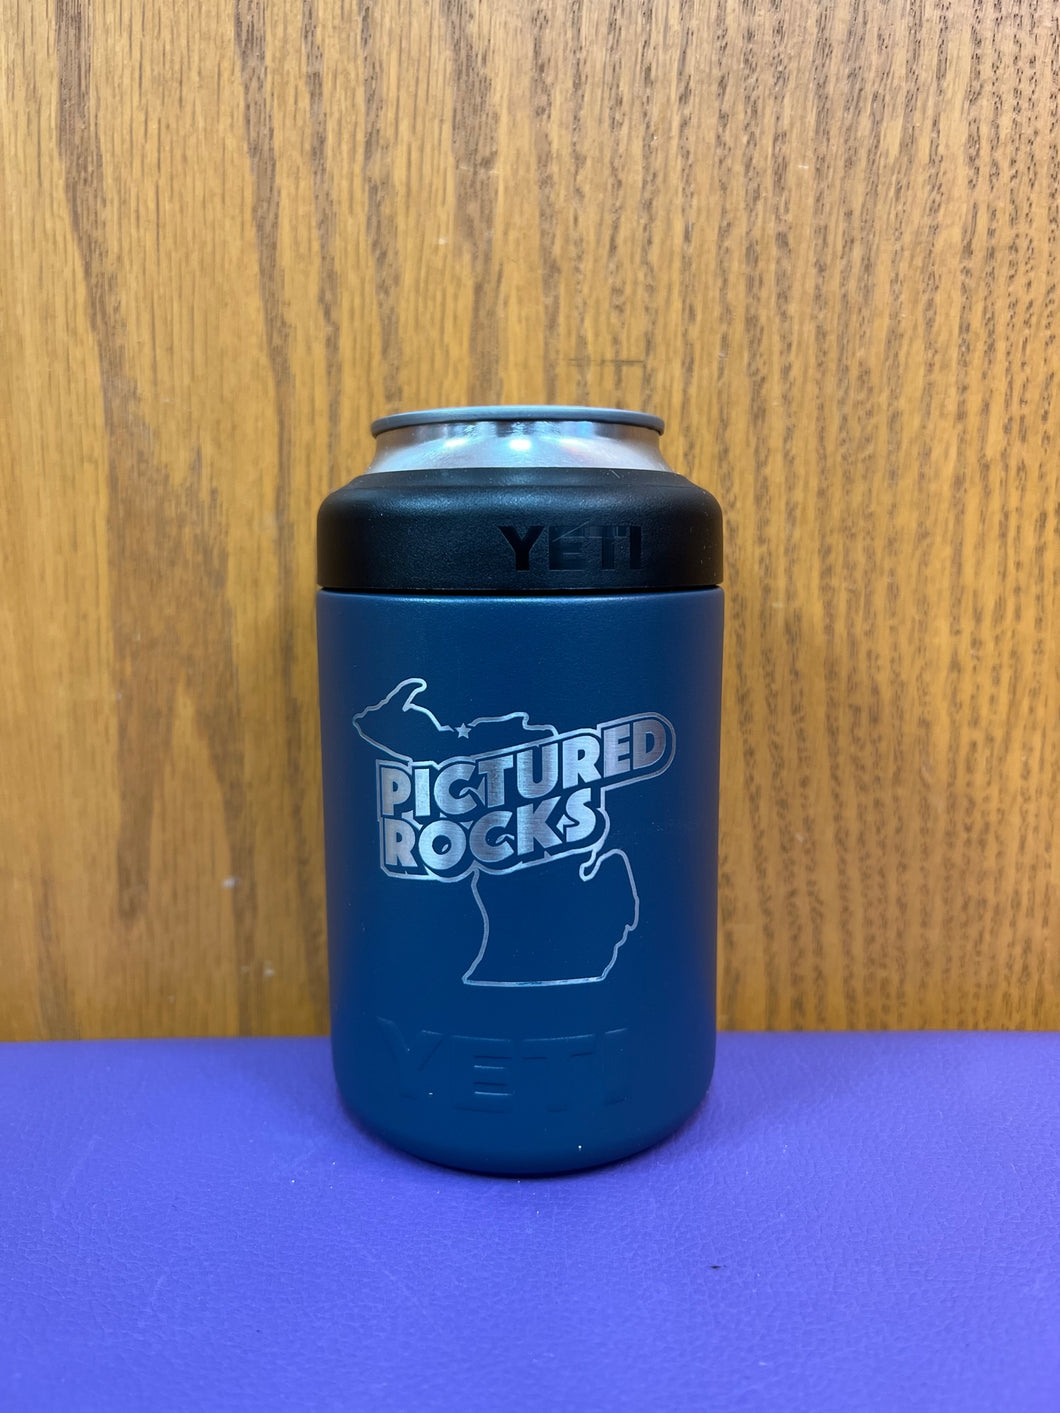 Yeti Pictured Rocks Colster 2.0